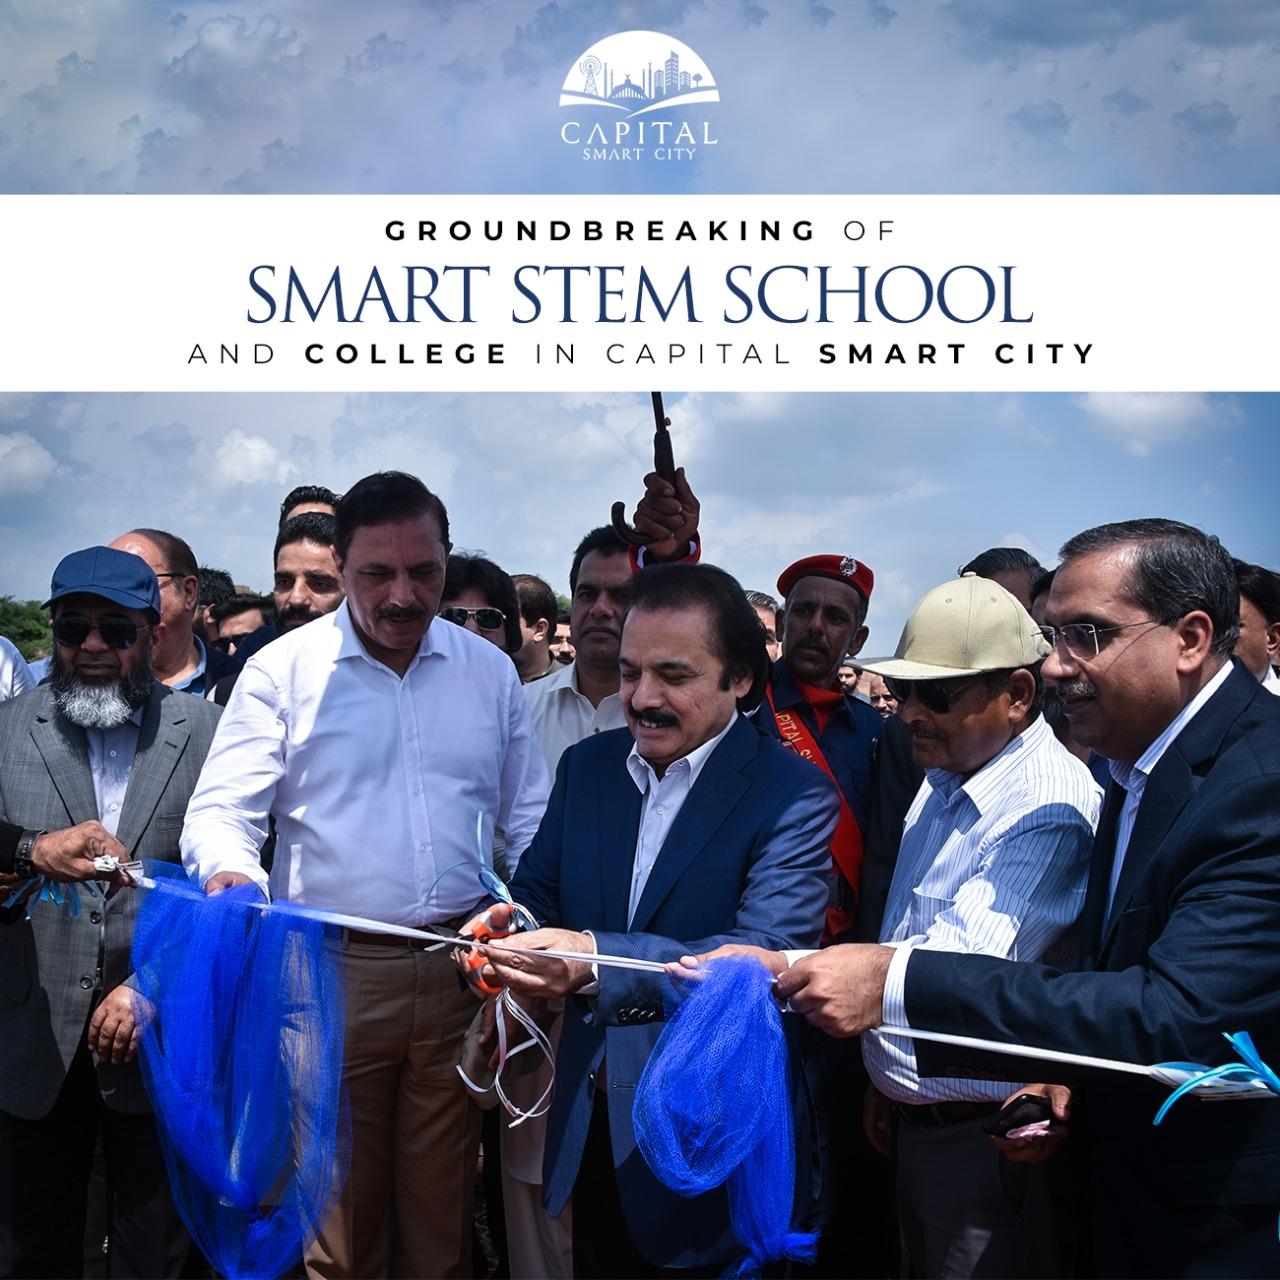 Ground Breaking of SMART STEM School and College in Capital Smart City